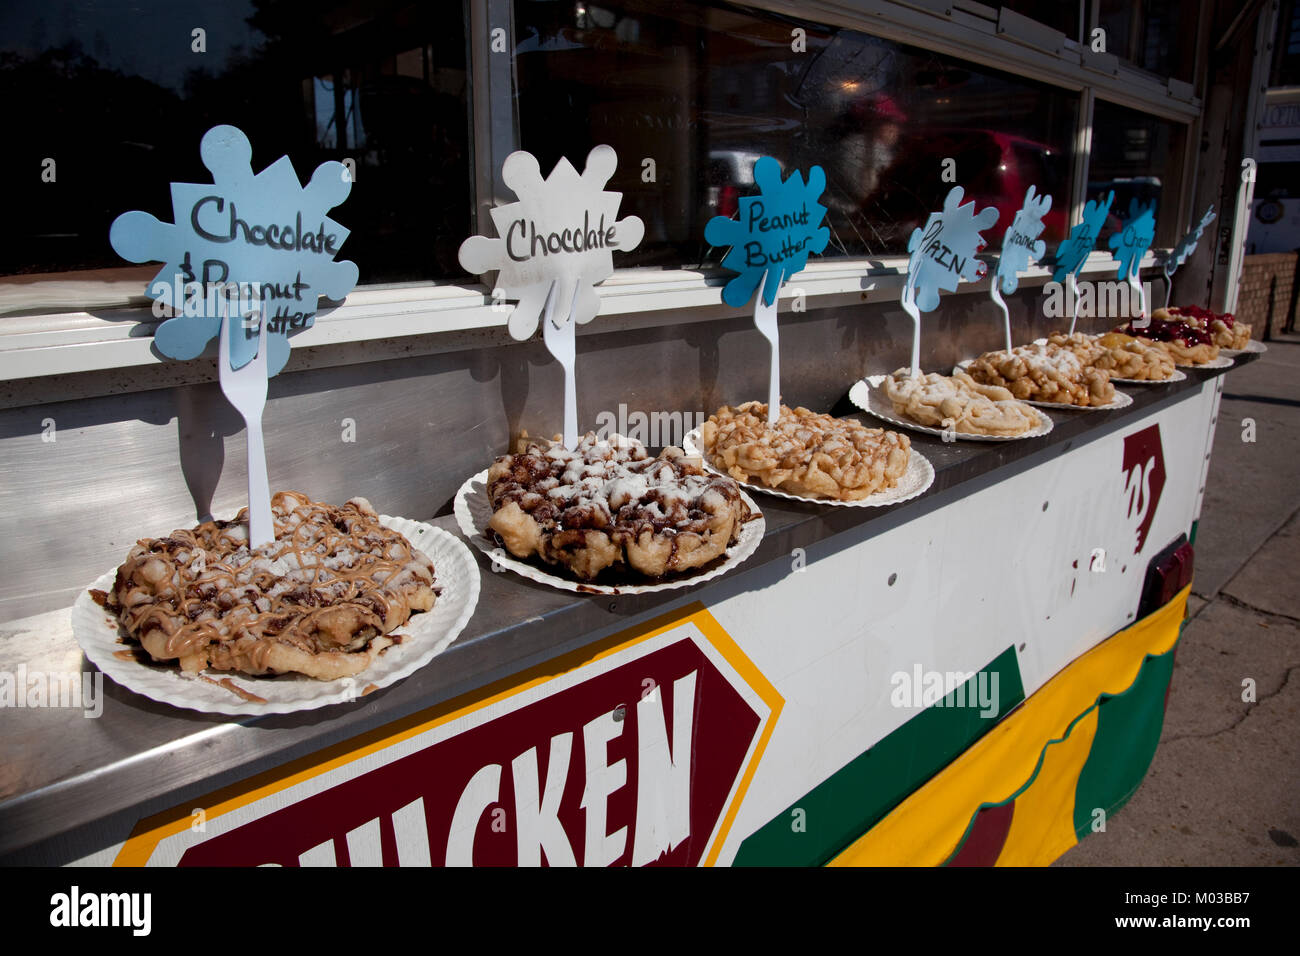 Funnel cakes are available in many flavors at the Mardi Gras celebration in Mobile, Alabama Stock Photo